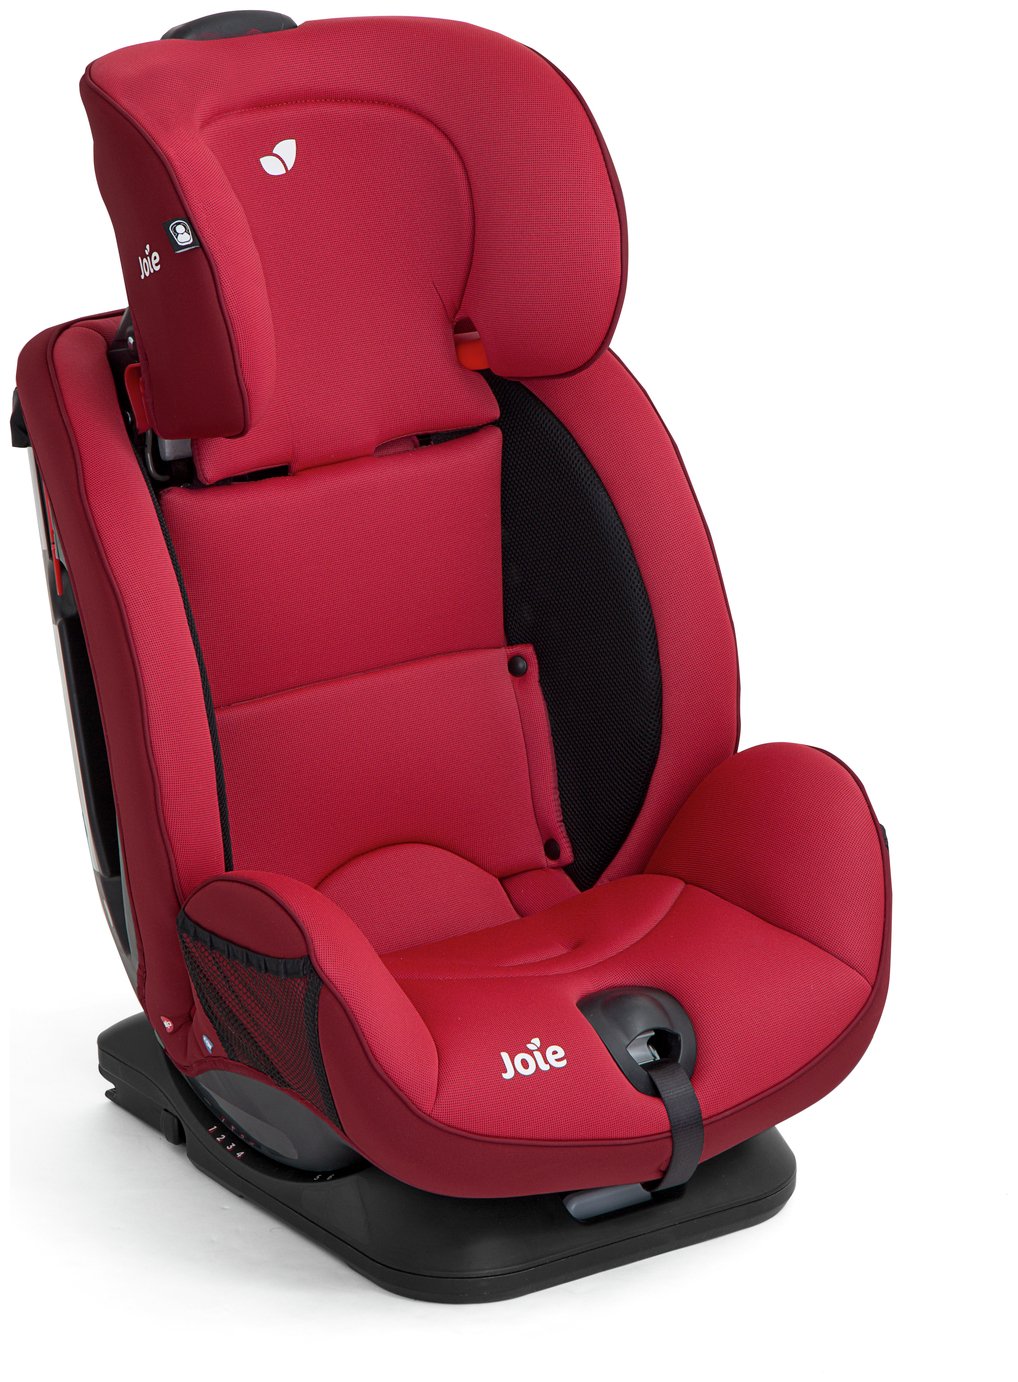 Joie Stages FX 0+/1/2 Isofix Car Seat Reviews